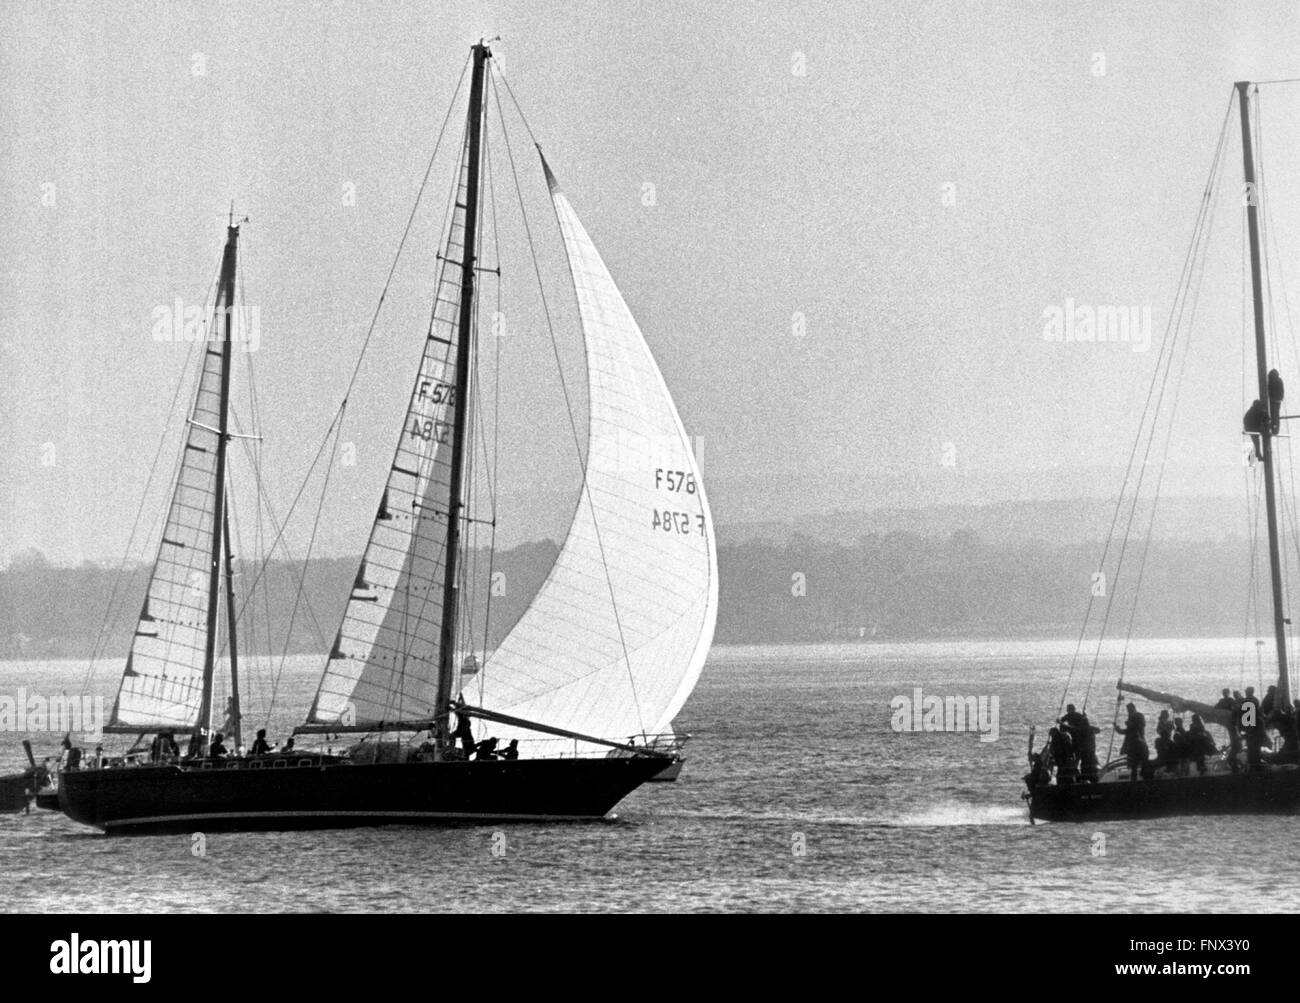 AJAX NEWS PHOTOS. 1974. SOUTHSEA, ENGLAND.- WHITBREAD ROUND THE WORLD RACE - FRENCH YACHT KRITER NEARS THE FINISH OF THE 4TH LEG OF THE RACE. PHOTO:JONATHAN EASTLAND/AJAX  REF:KRITER WRWR 74 Stock Photo